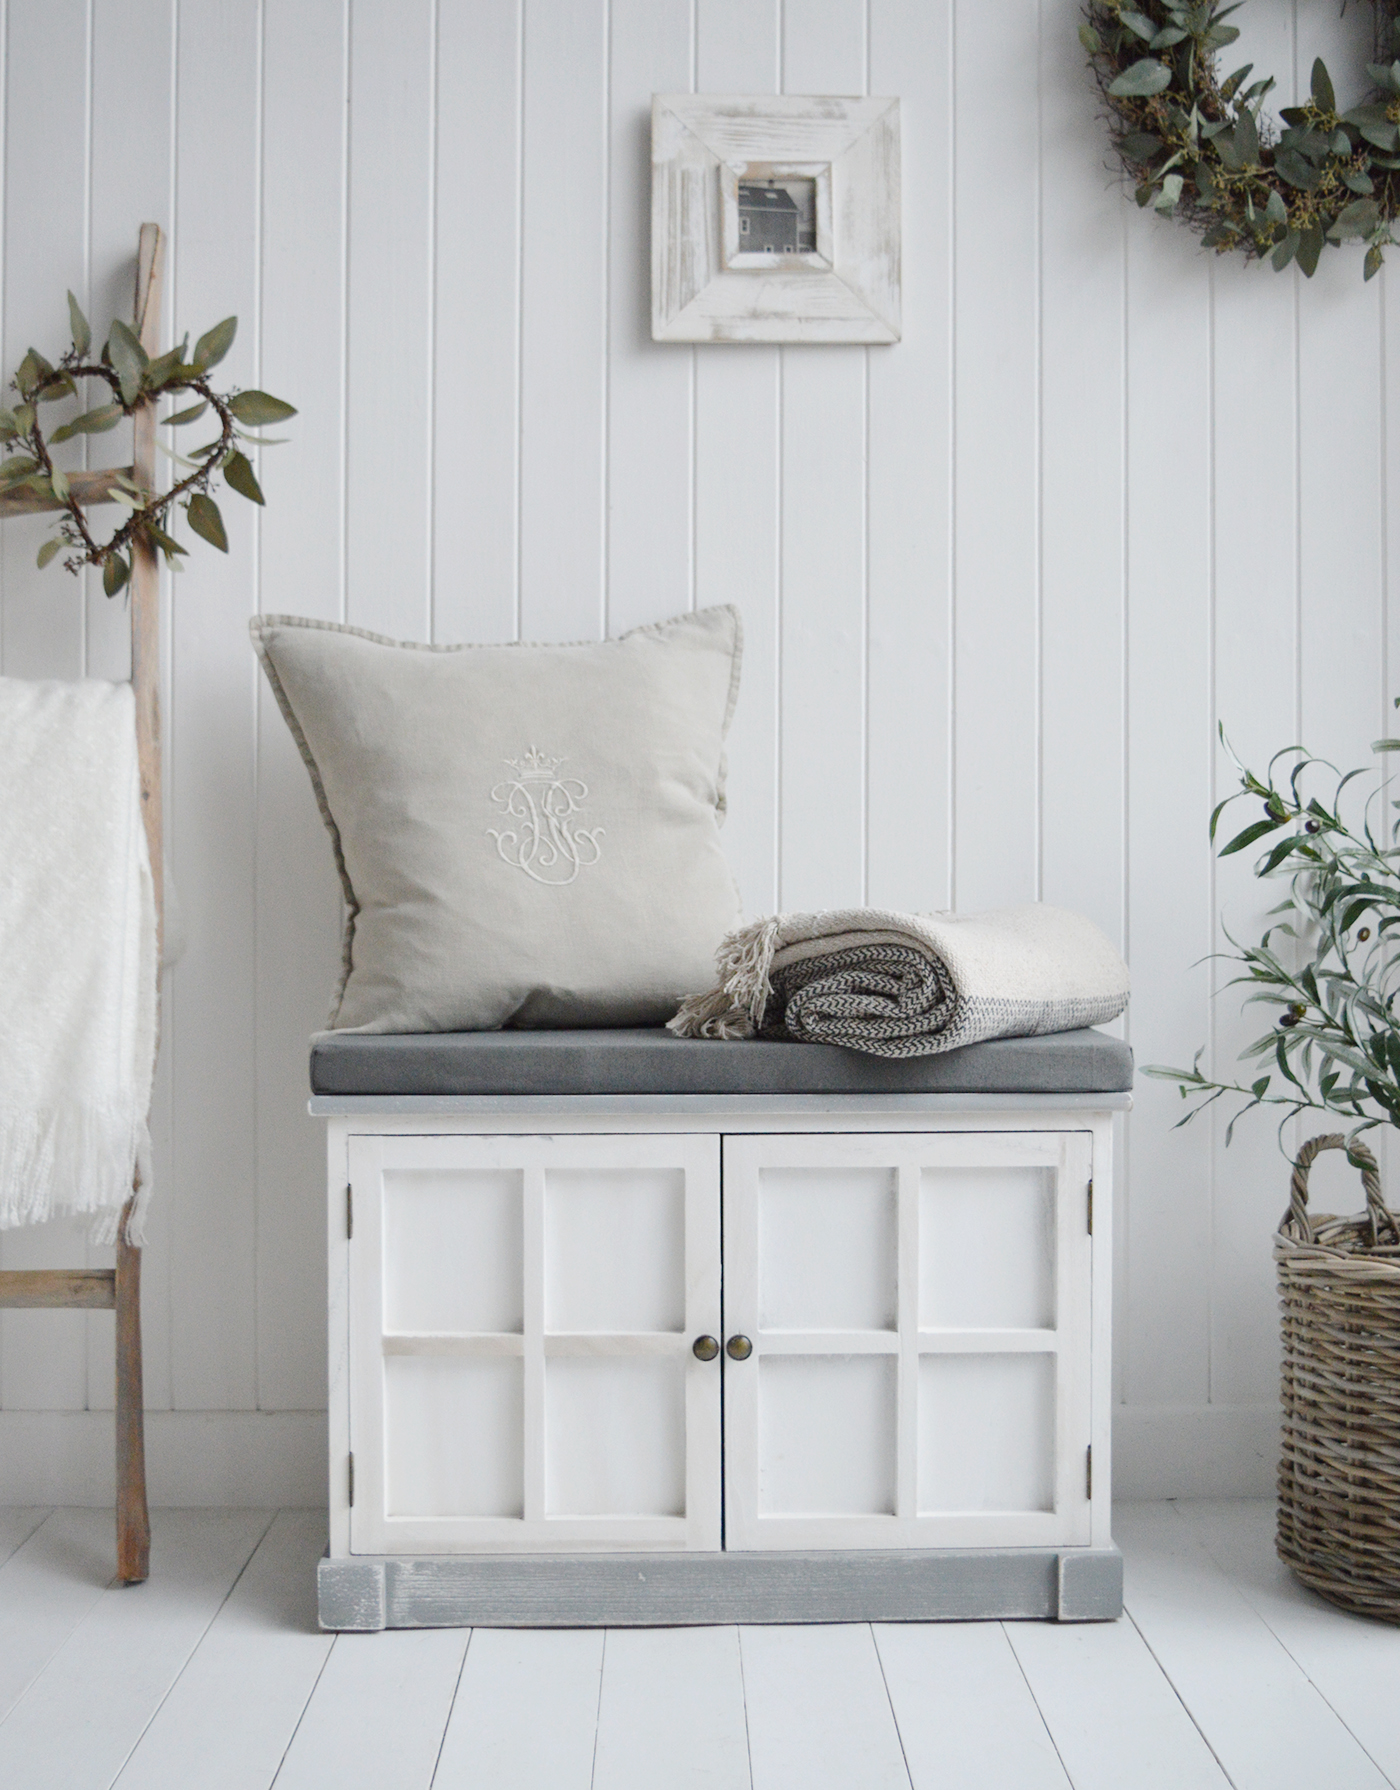 Charlotte White Wooden Storage Bench - New England Modern Farmhouse and Coastal Storage Furniture for the hall, living room, bedroom and bathroom